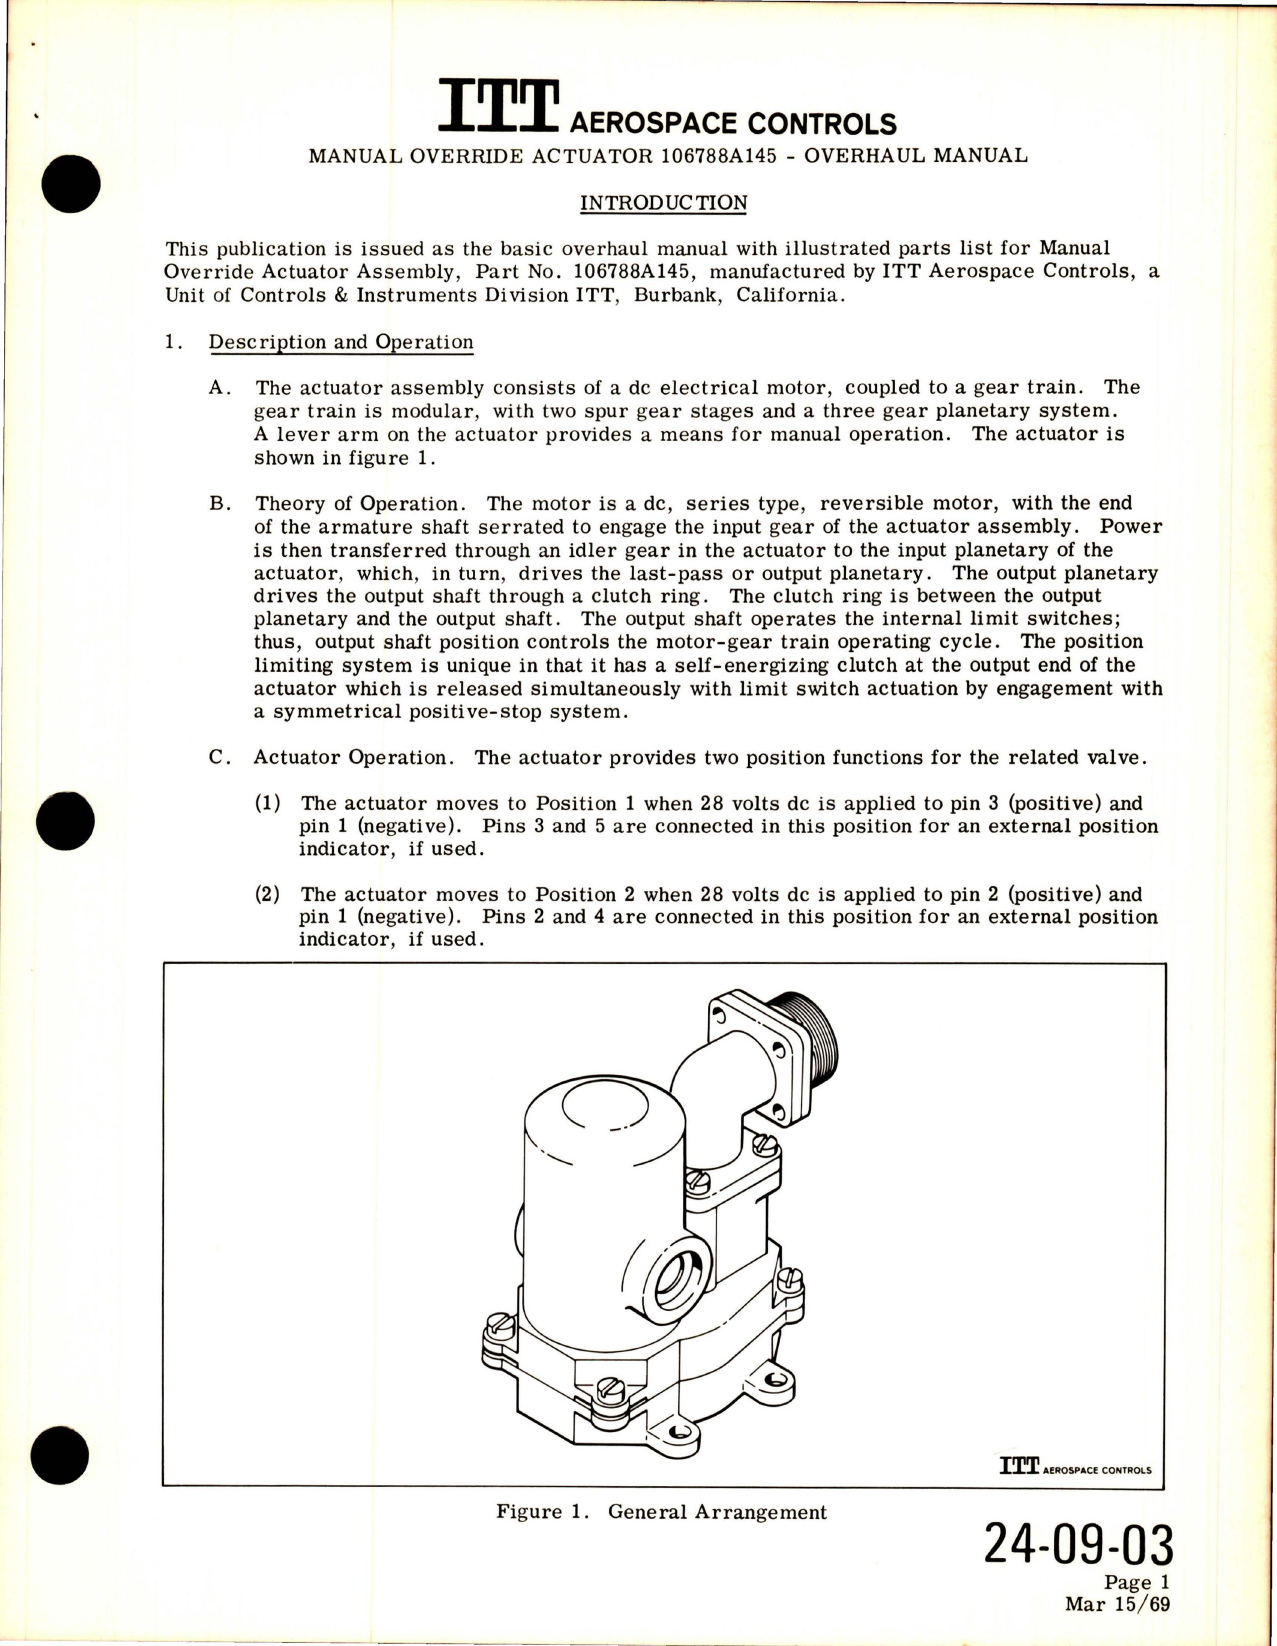 Sample page 7 from AirCorps Library document: Overhaul Instructions with Parts Lists for Manual Override Actuator - Part 106788A145